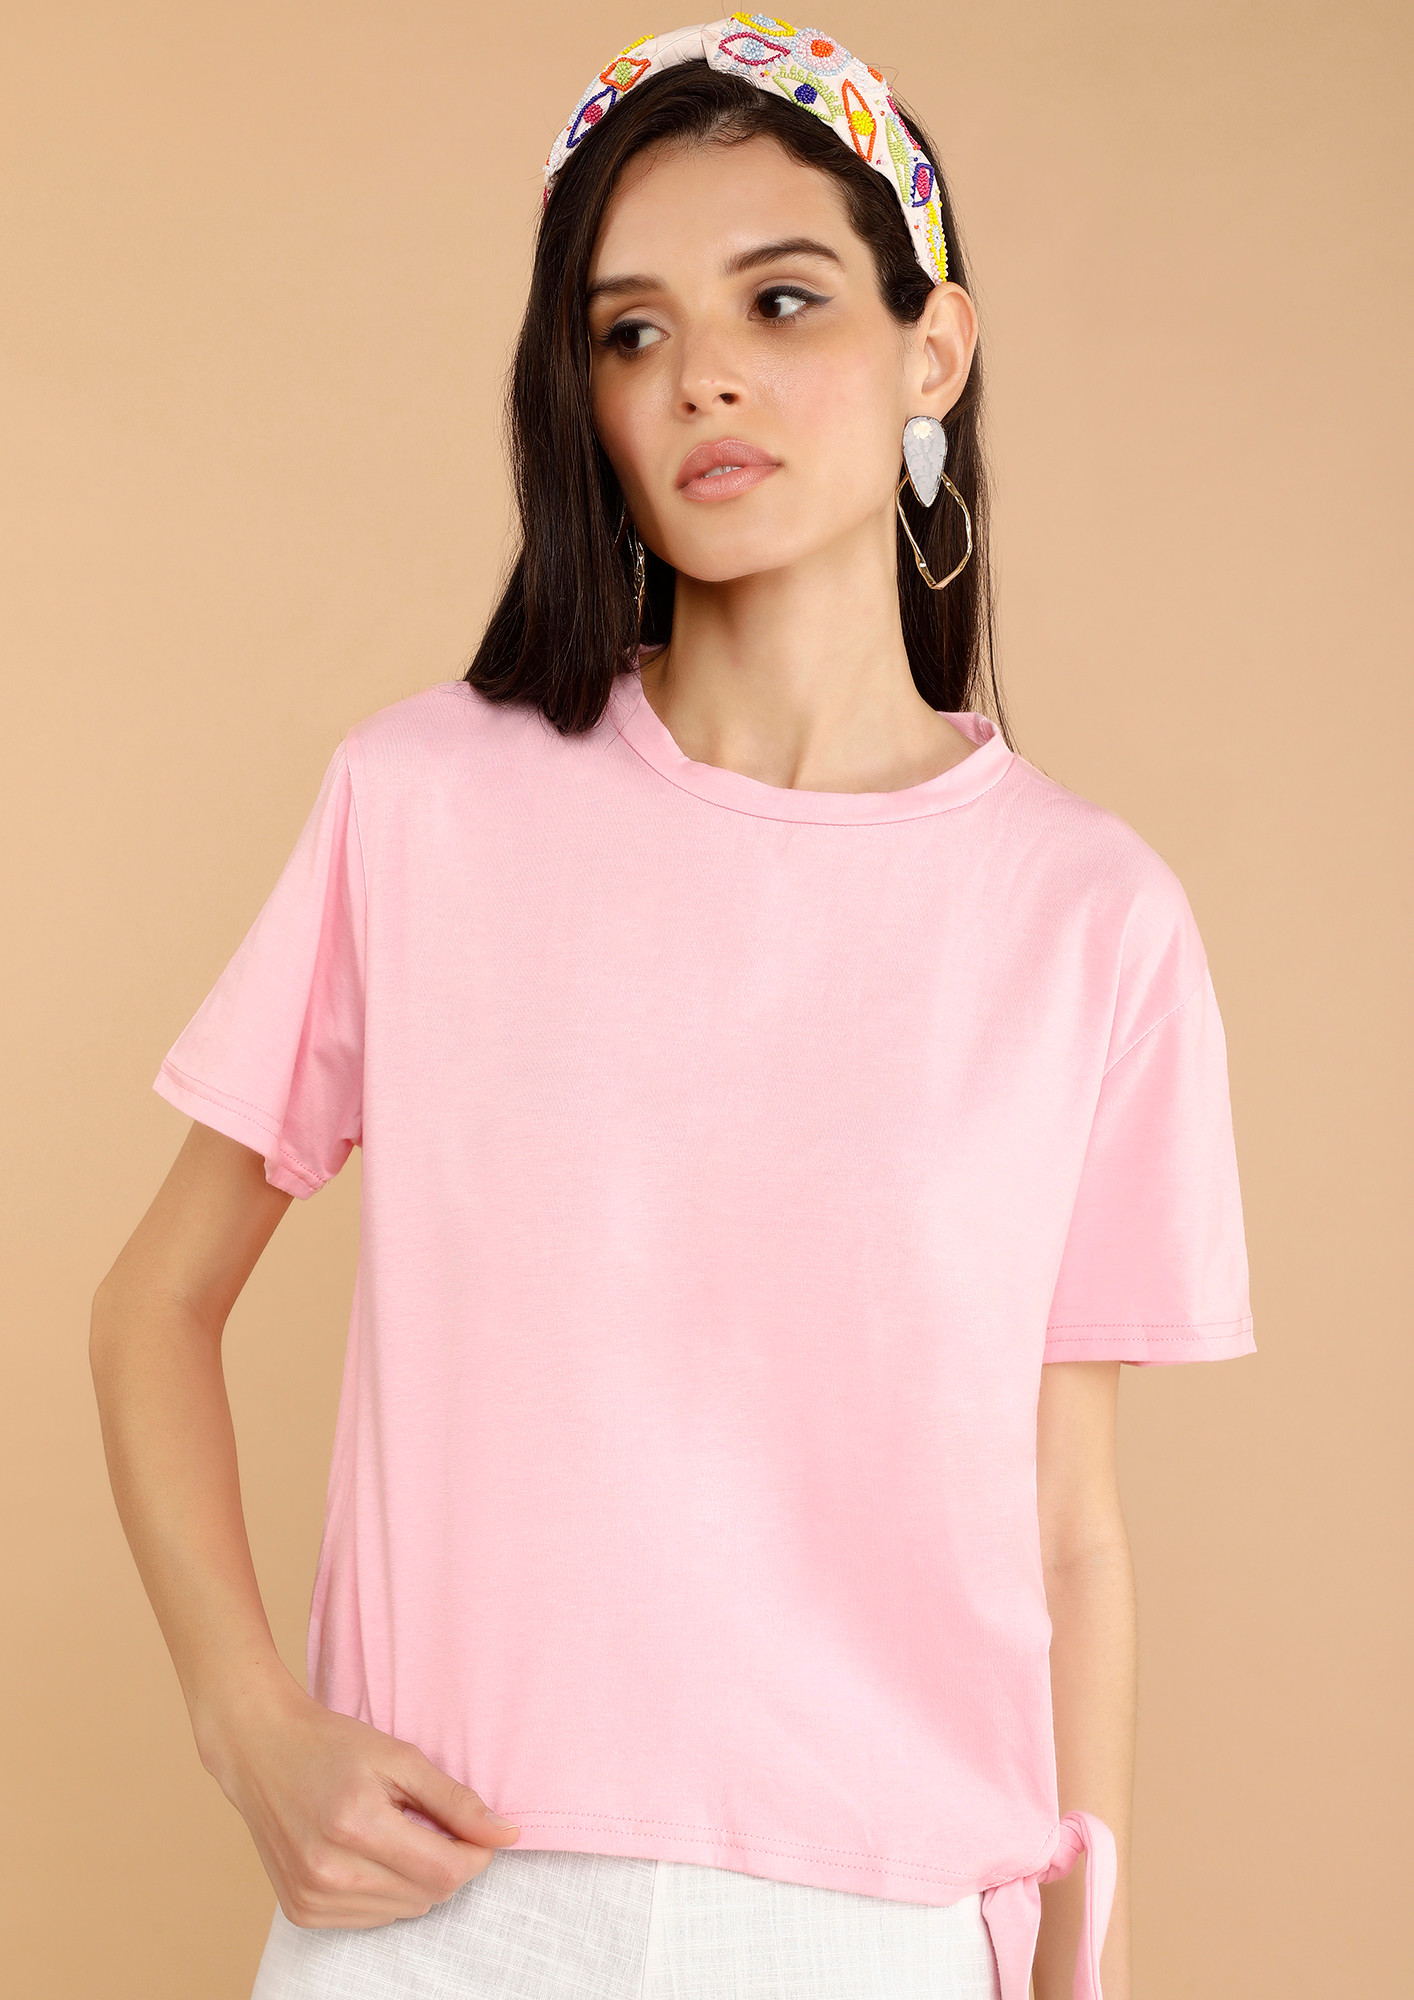 SOLID SIDE KNOT-TIE DETAIL LIGHT-PINK T-SHIRT